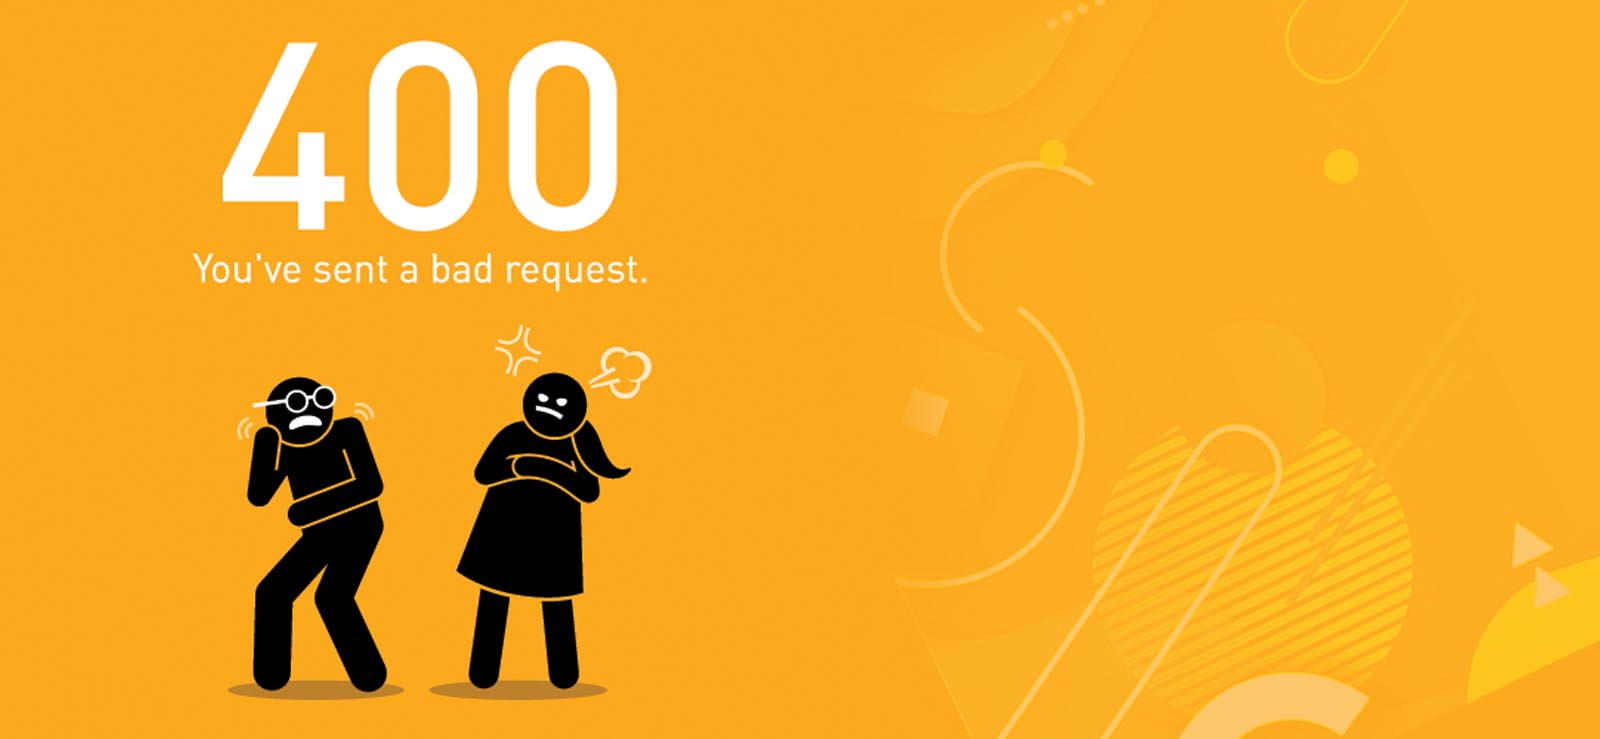 How to fix the “HTTP 400 Bad Request” error in Exchange Server?